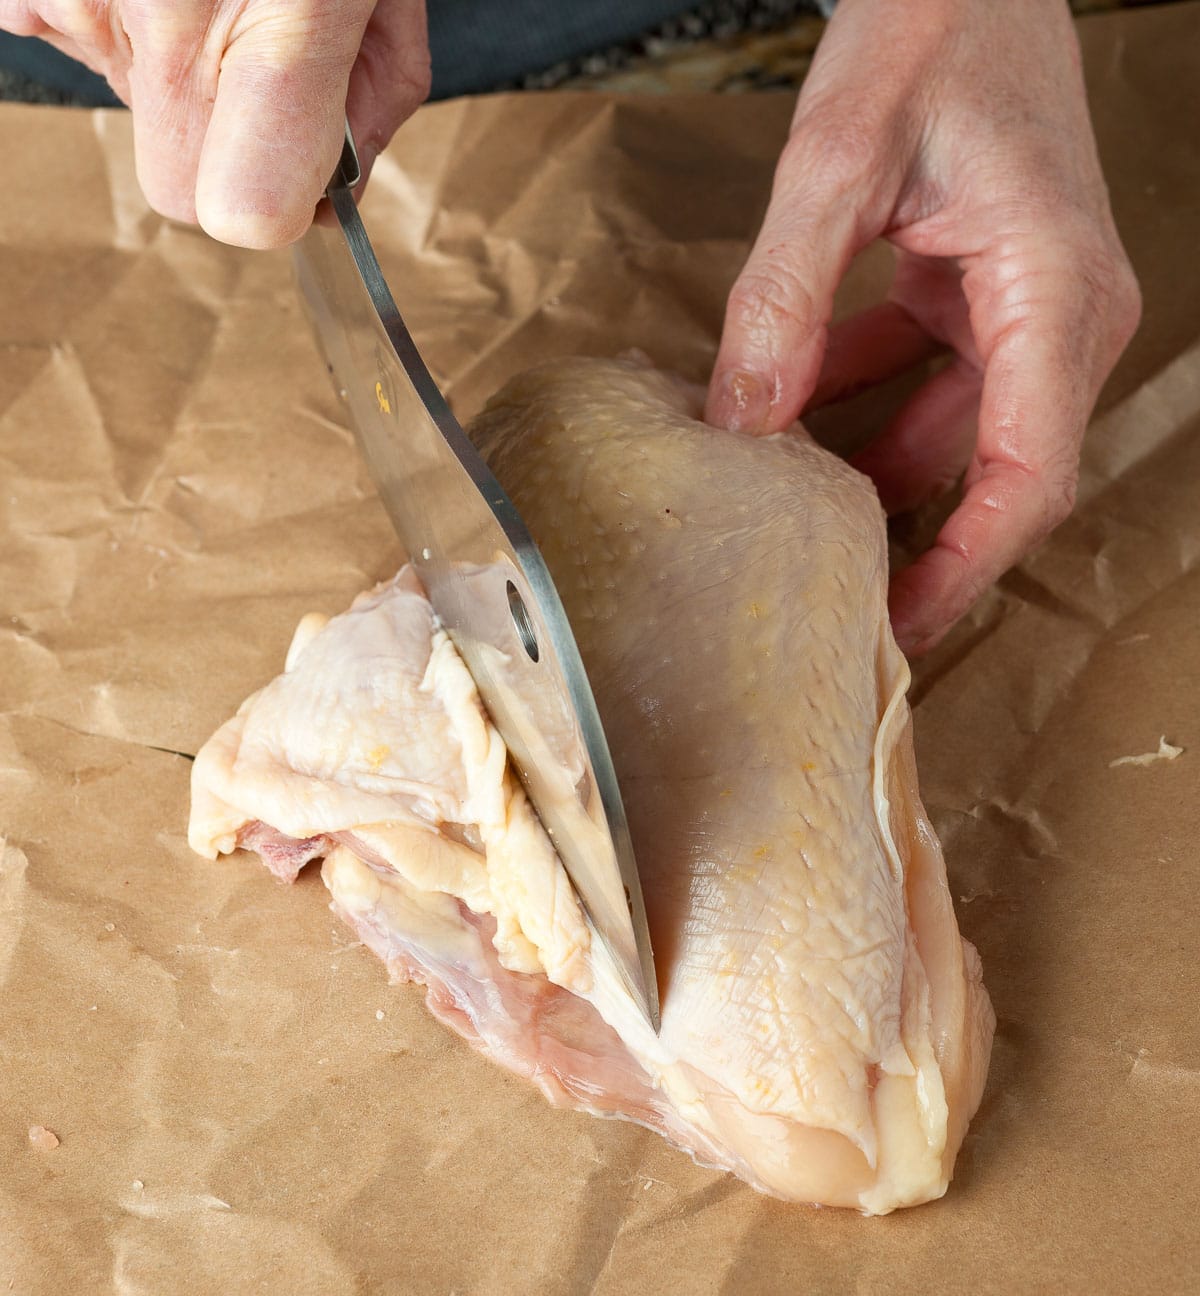 Trimming small ribs bones from a raw bone-in chicken breast.